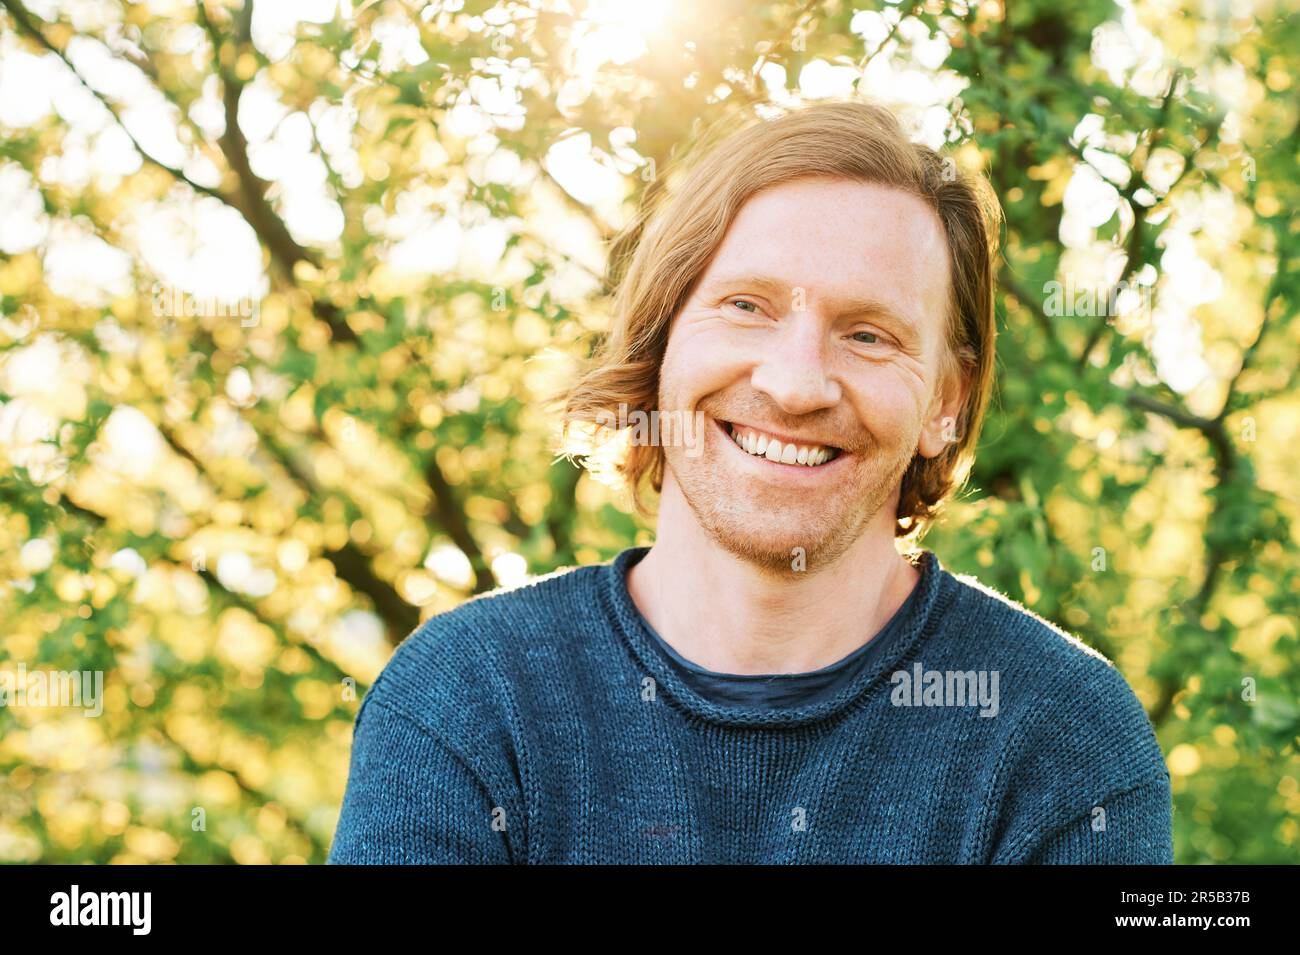 Outdoor portrait of handsome 35 - 40 year old man with red hair, posing in green sunny park, wearing blue pullover Stock Photo